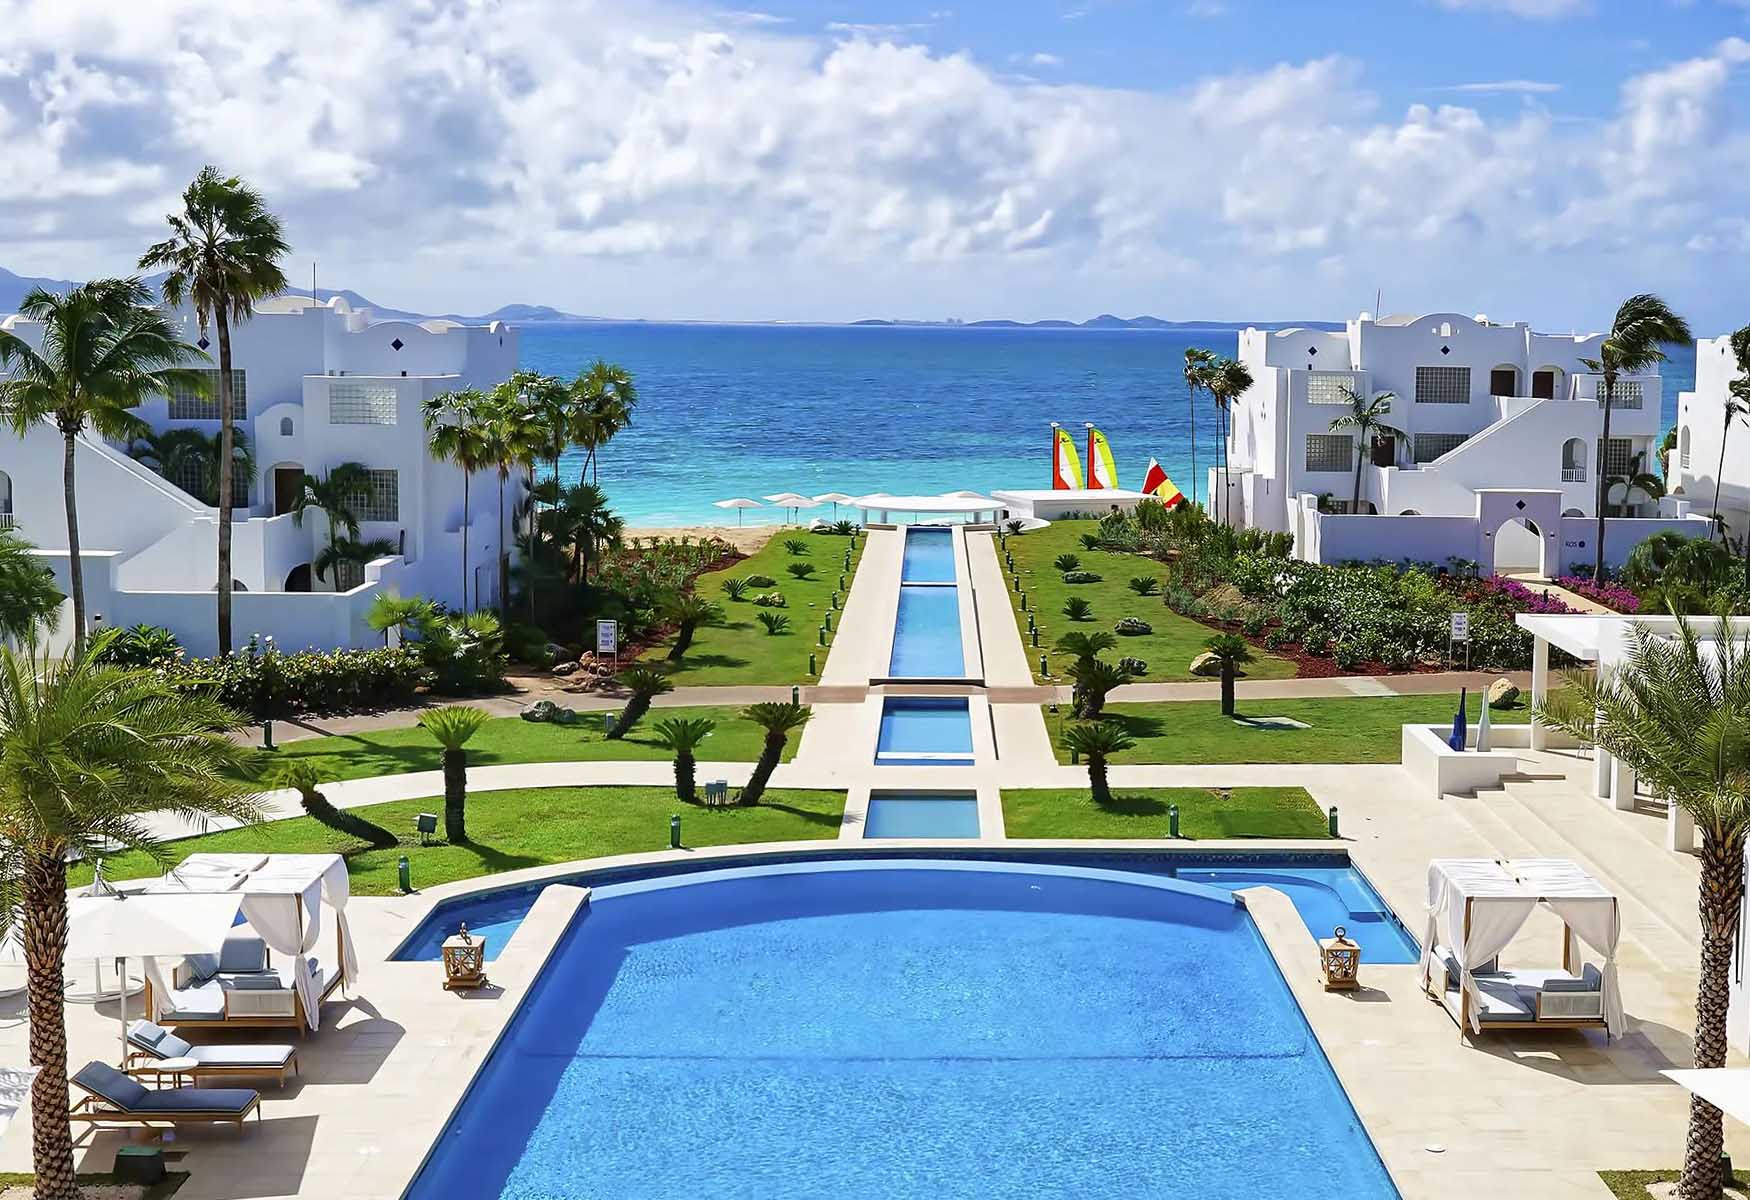 Where To Stay In Anguilla: The BEST Areas